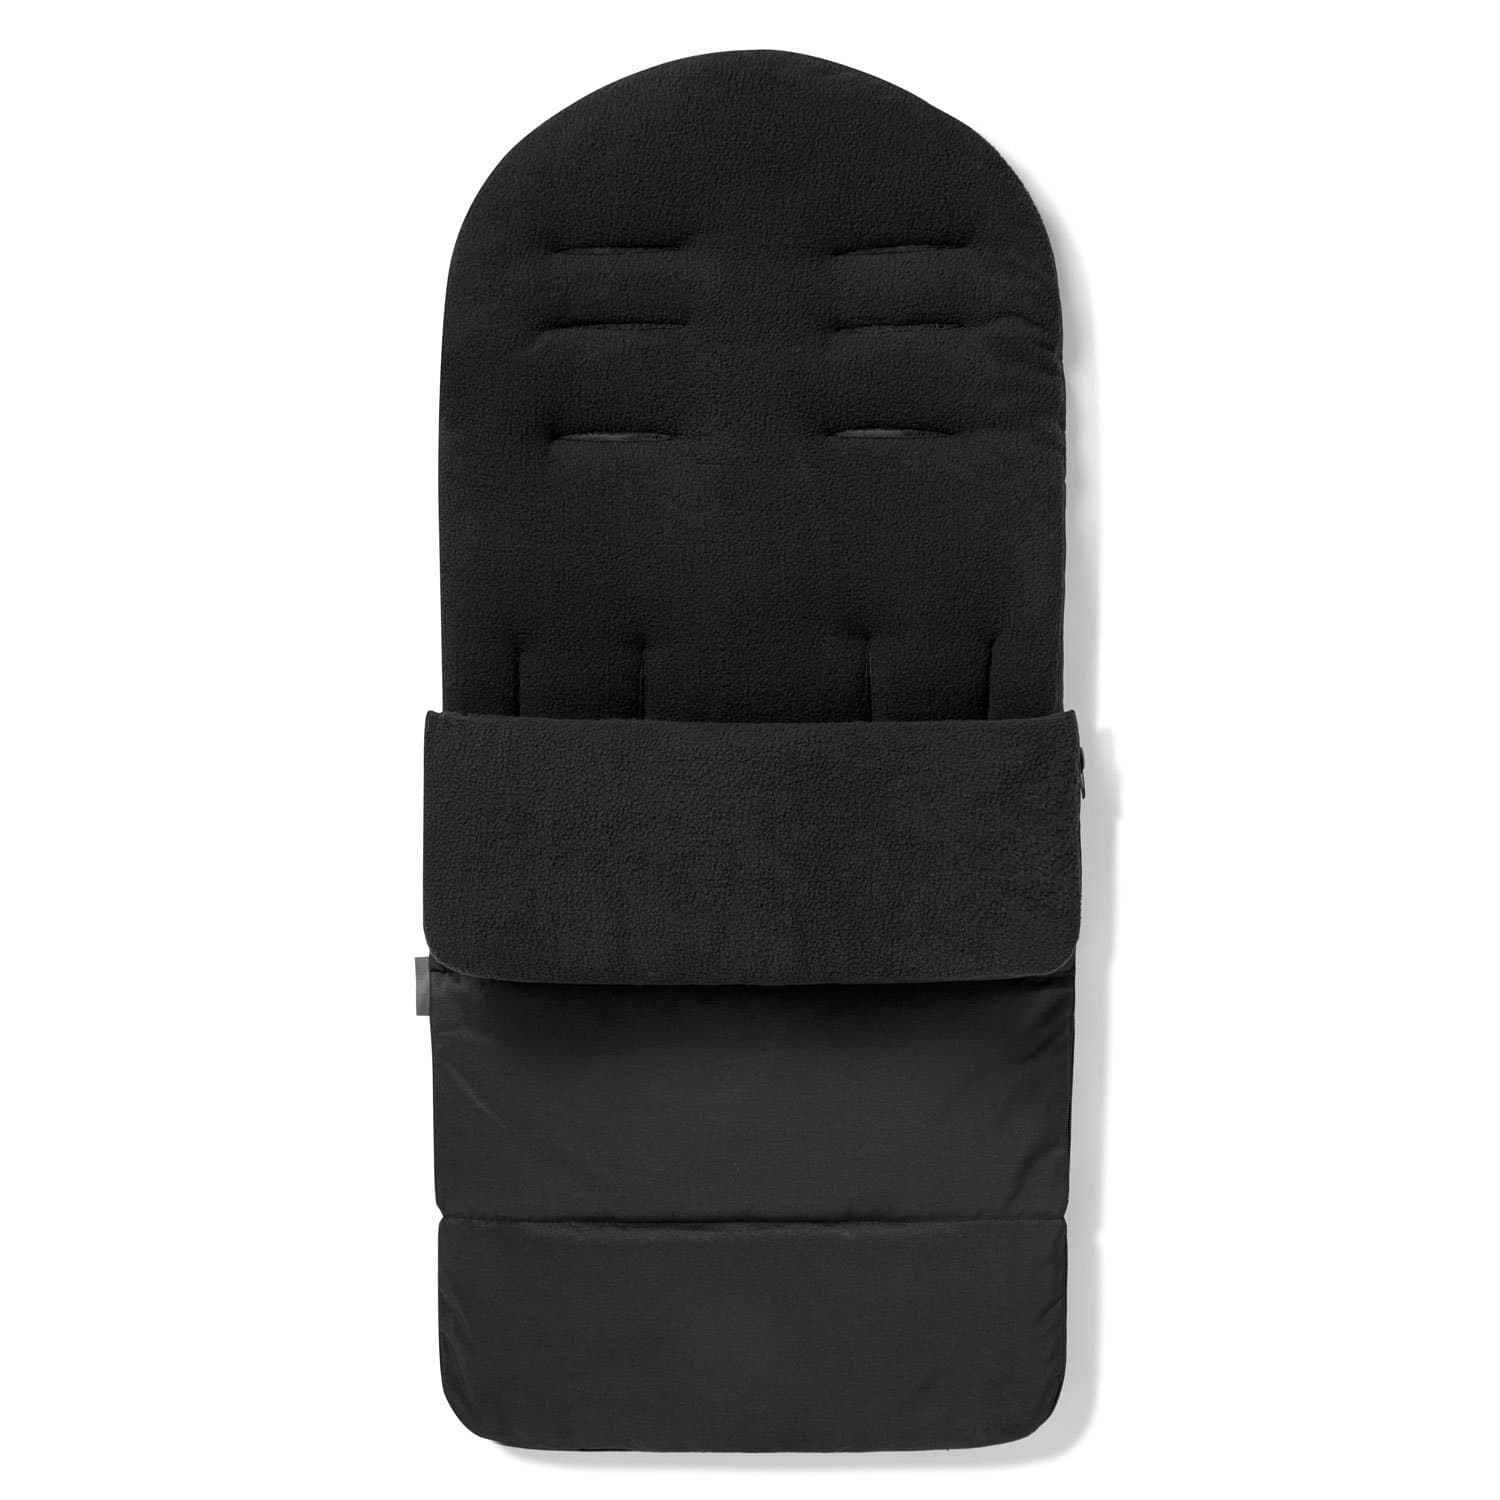 Premium Footmuff / Cosy Toes Compatible with Kids Kargo - Black Jack / Fits All Models | For Your Little One